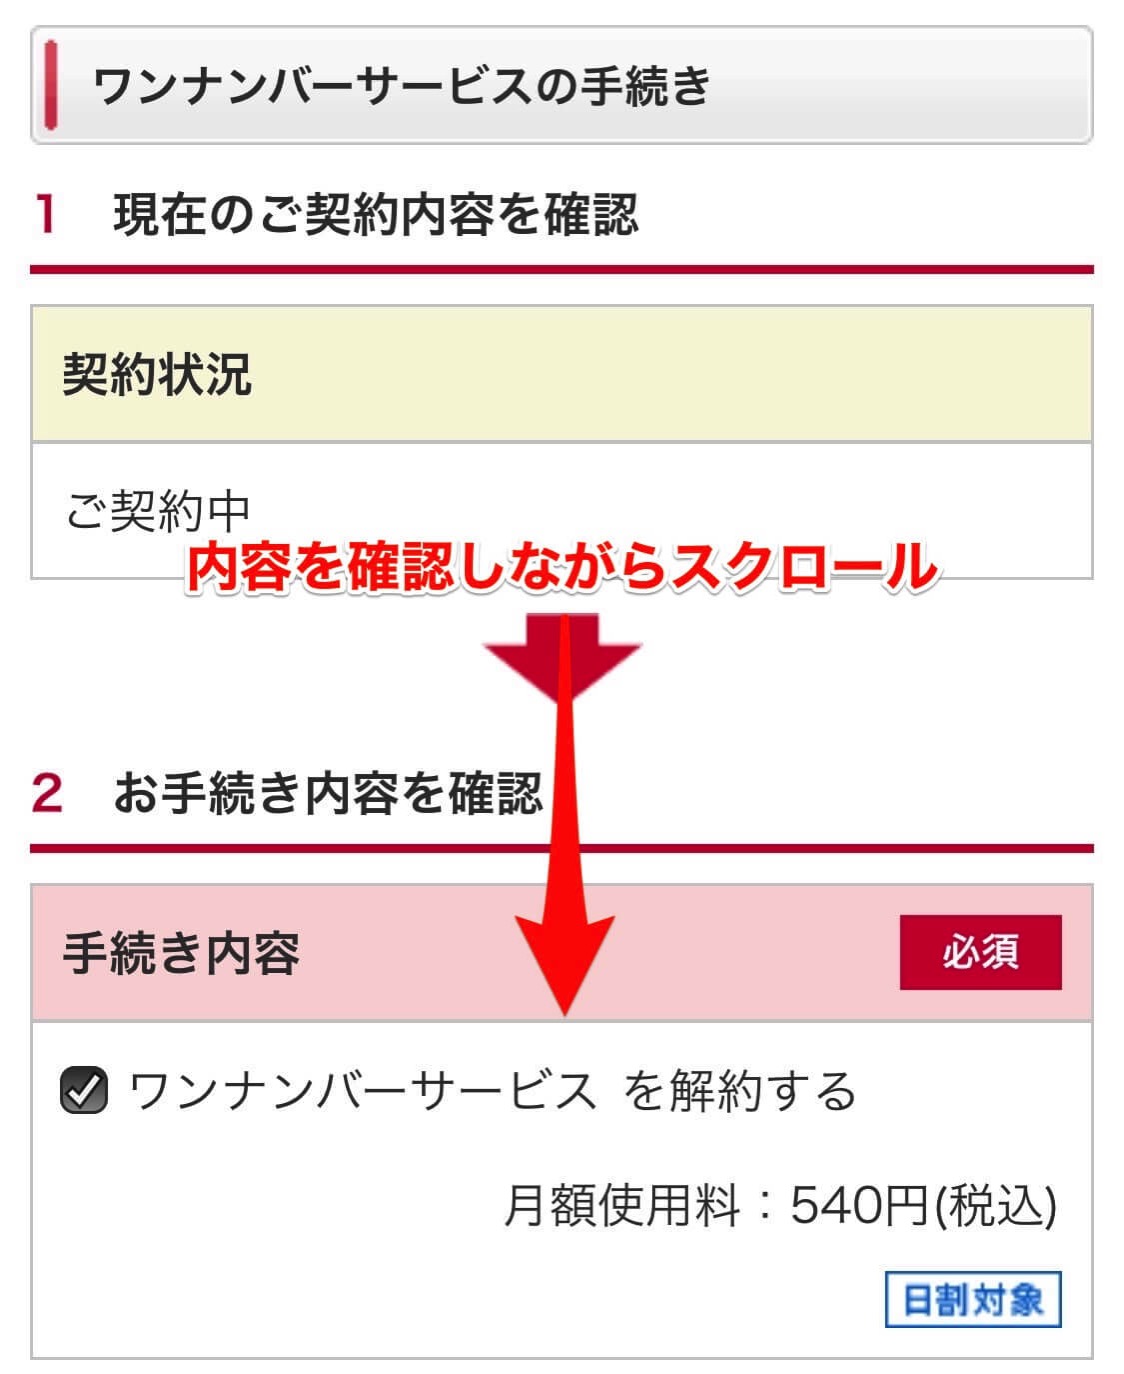 The docomo one number service cancellation of a contract 6